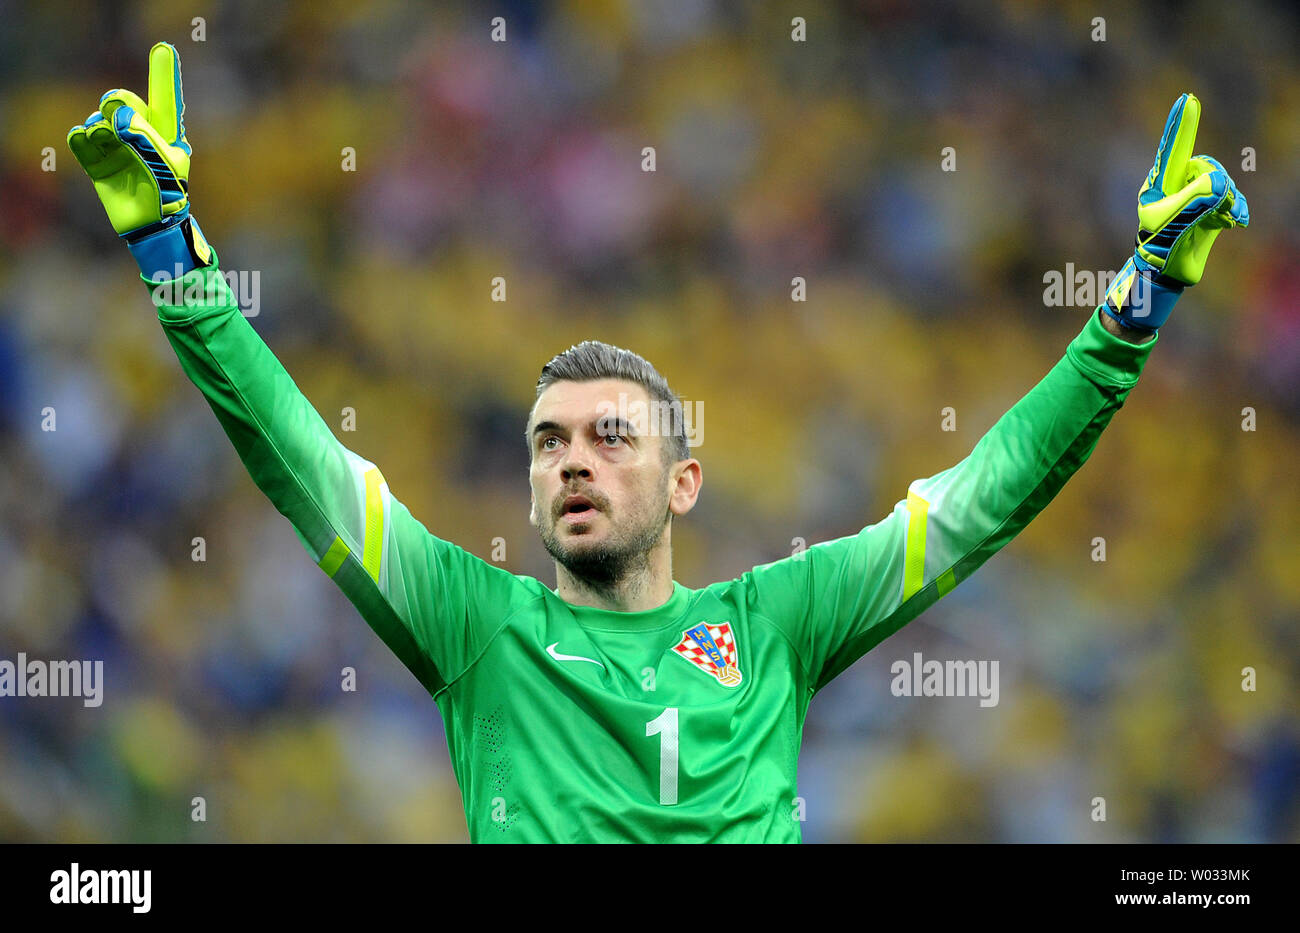 Stipe Pletikosa of Croatia celebrates the opening goal during the 2014 FIFA World Cup Group A match at the Arena Corinthians in Sao Paulo, Brazil on June 12, 2014. UPI/Chris Brunskill Stock Photo